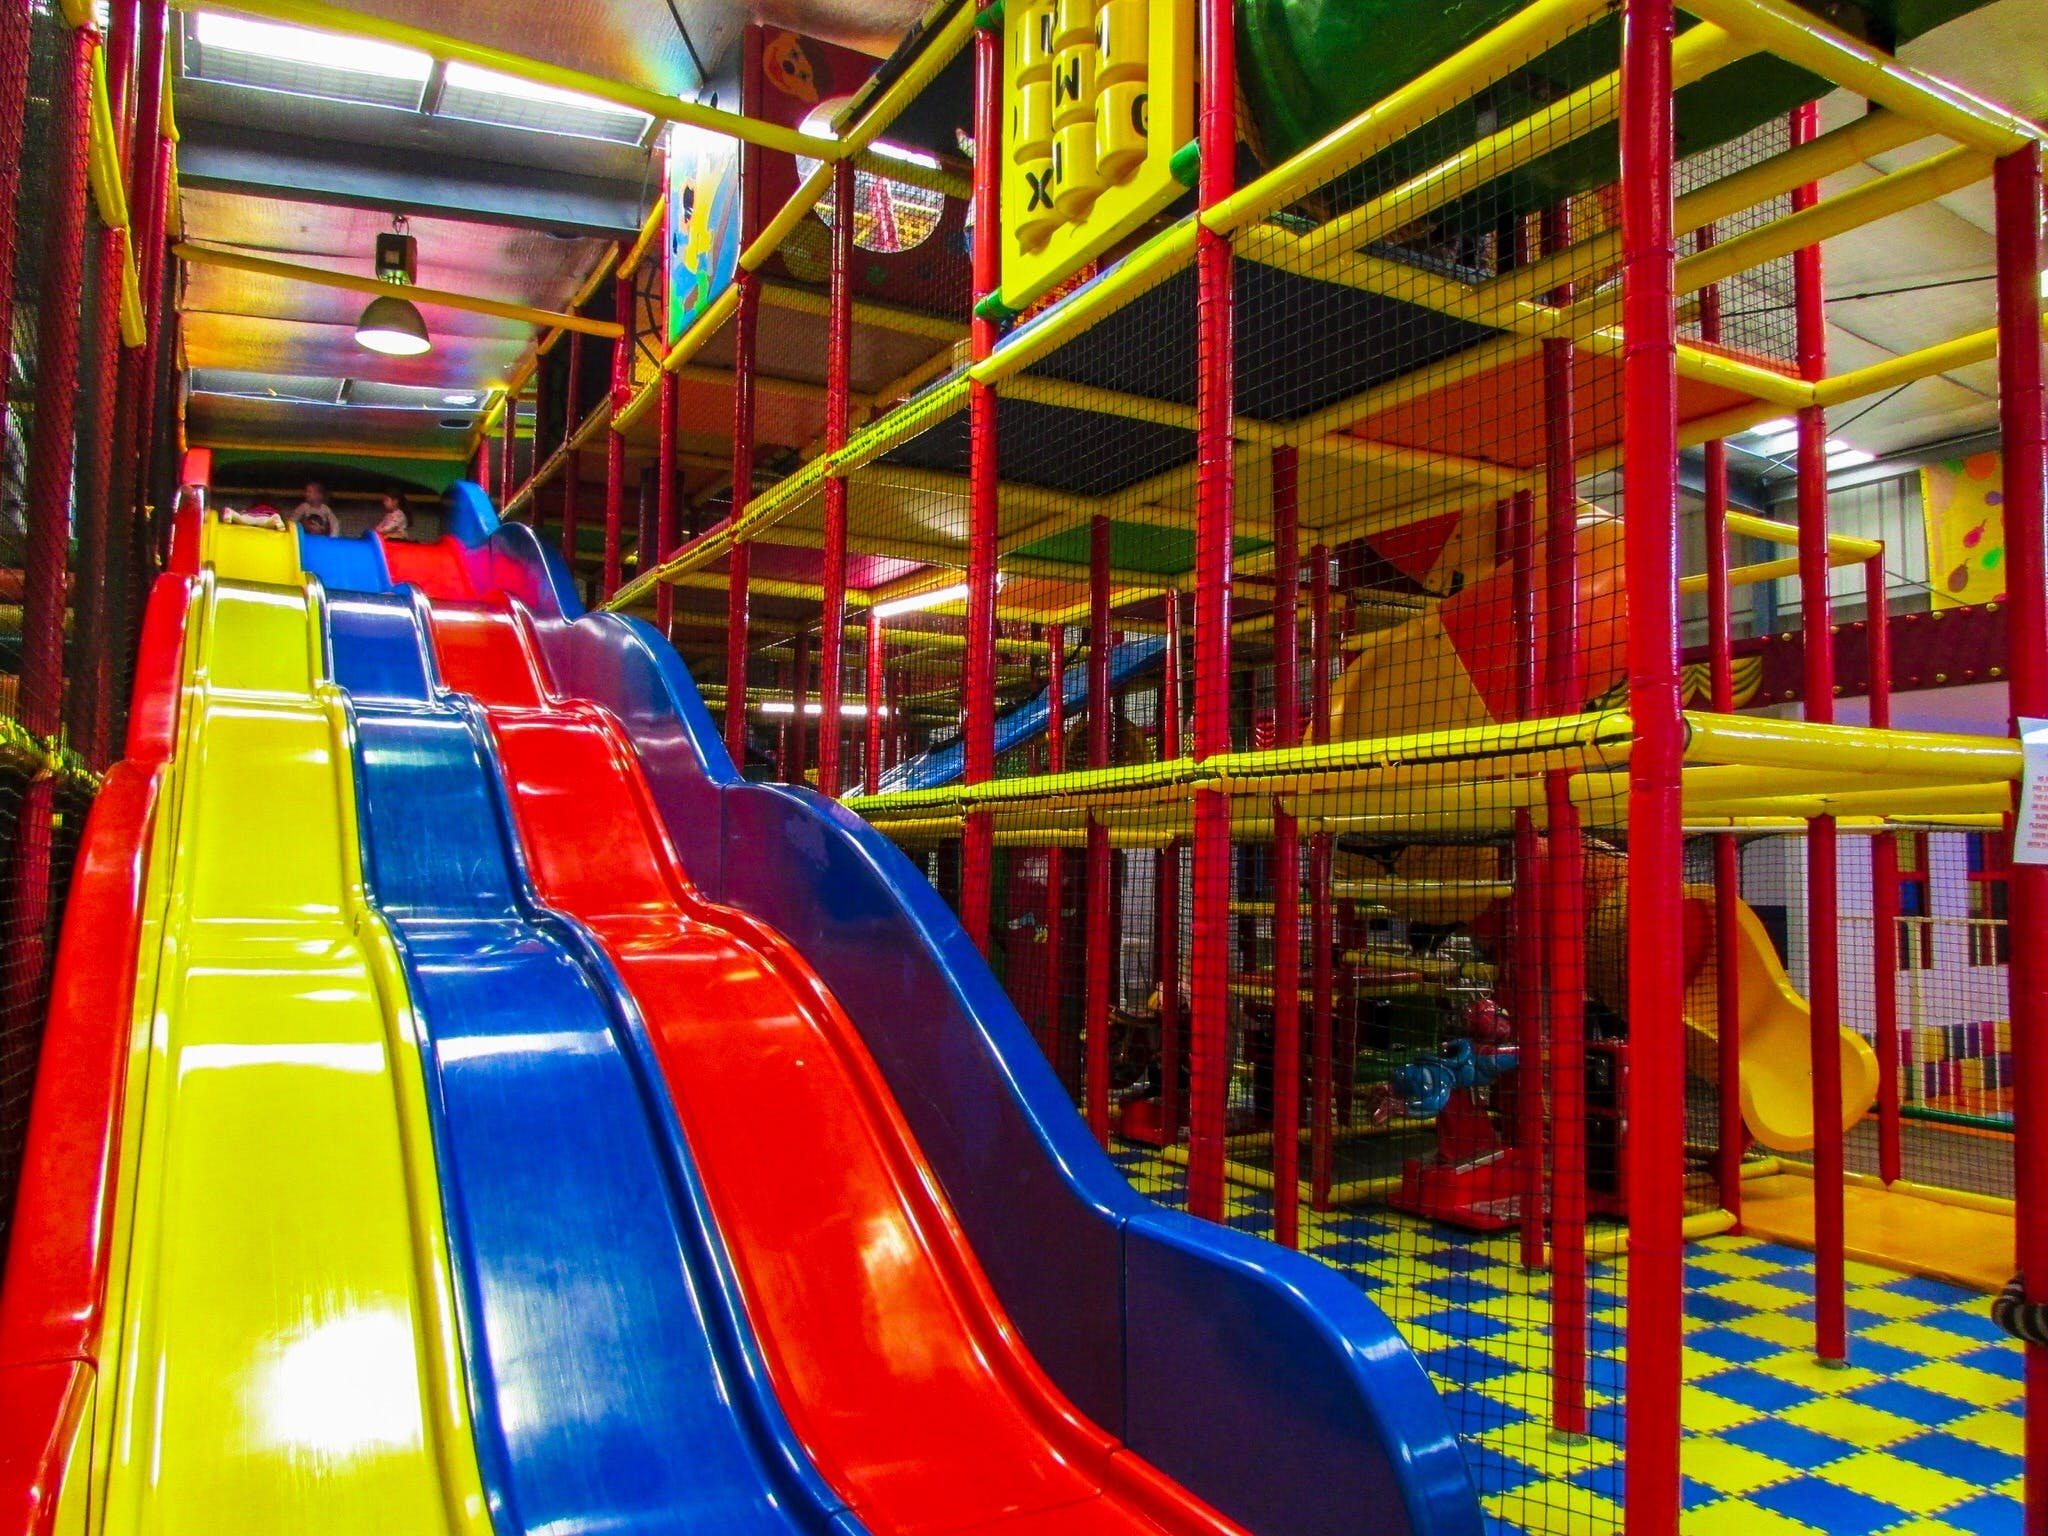 Kidz Shed Indoor Play Centre and Cafe - Find Attractions